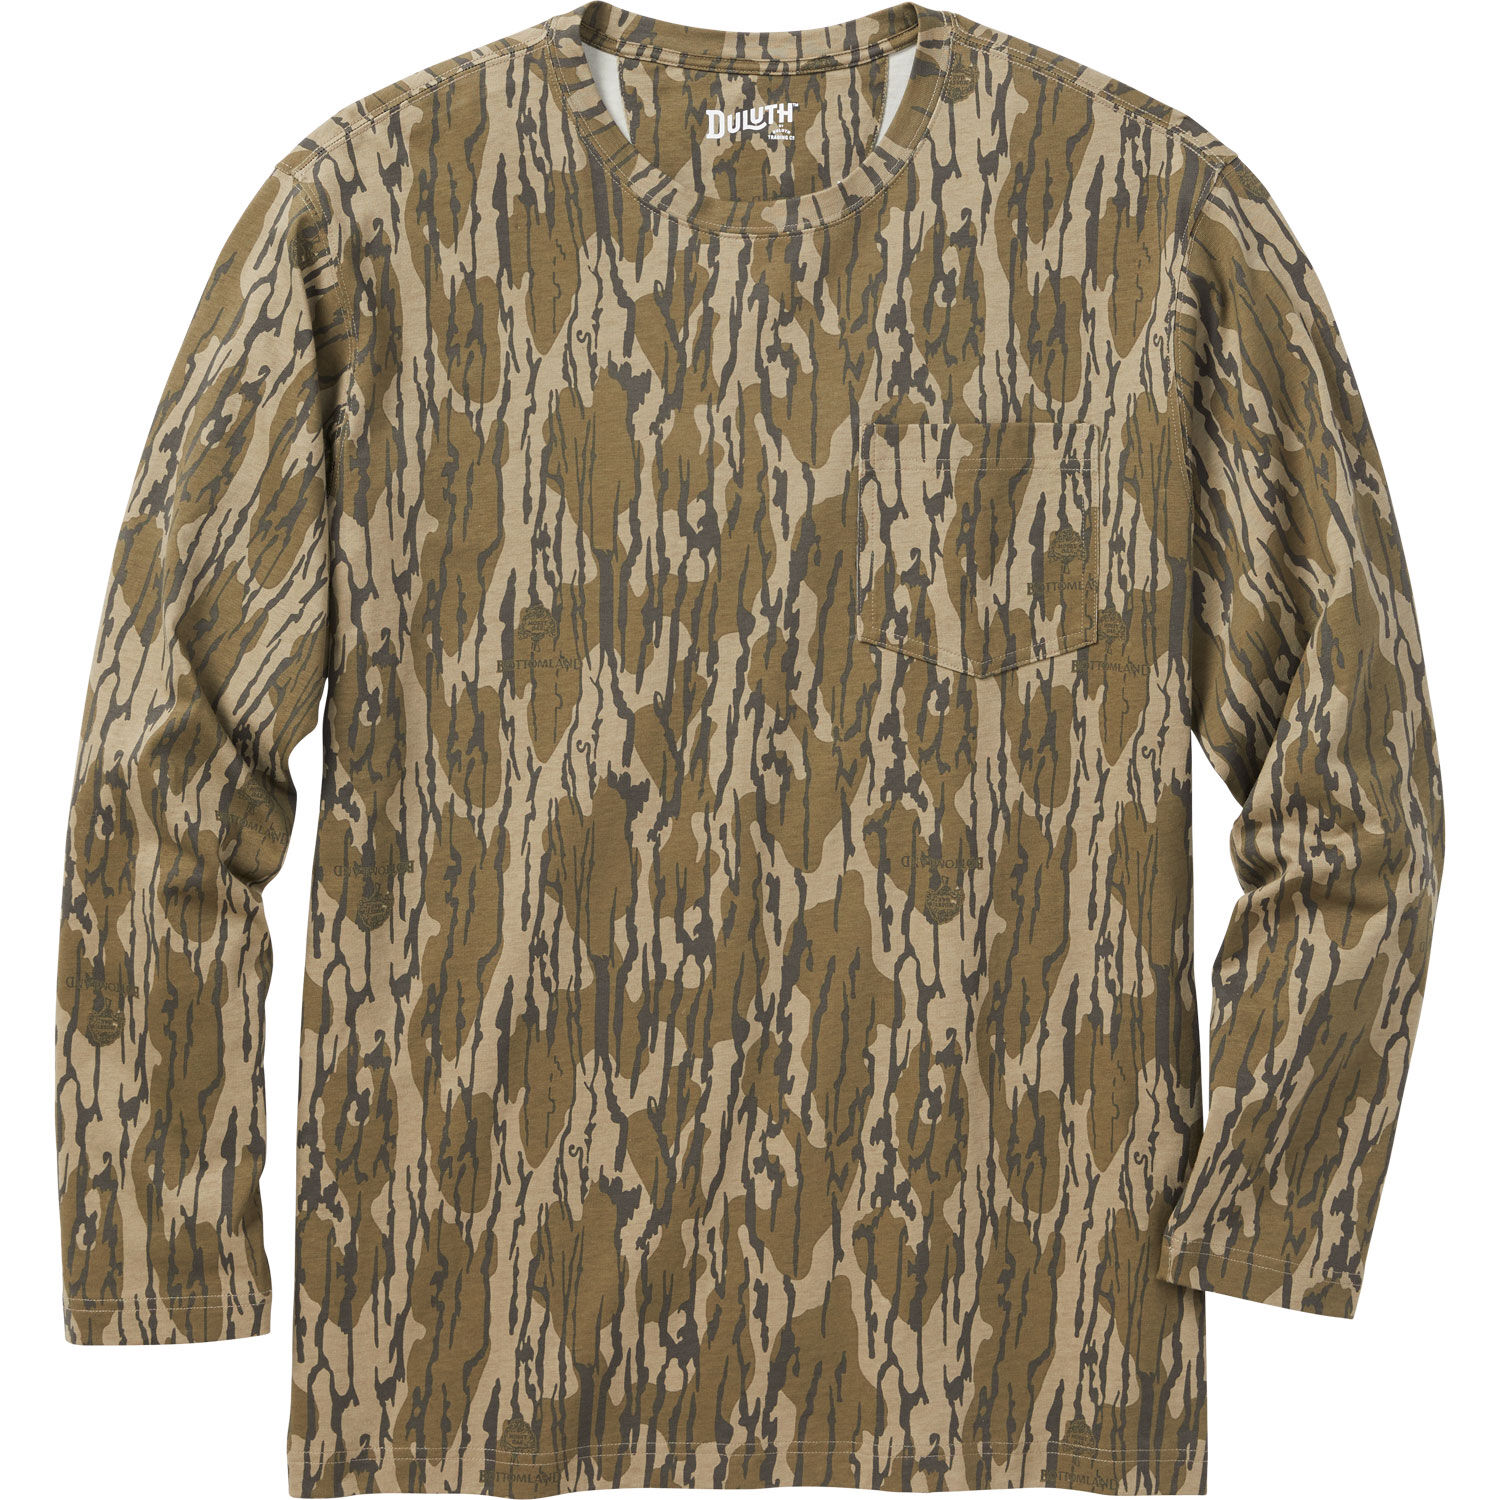 Men's Longtail T Mossy Oak Relaxed Fit Long Sleeve Shirt with